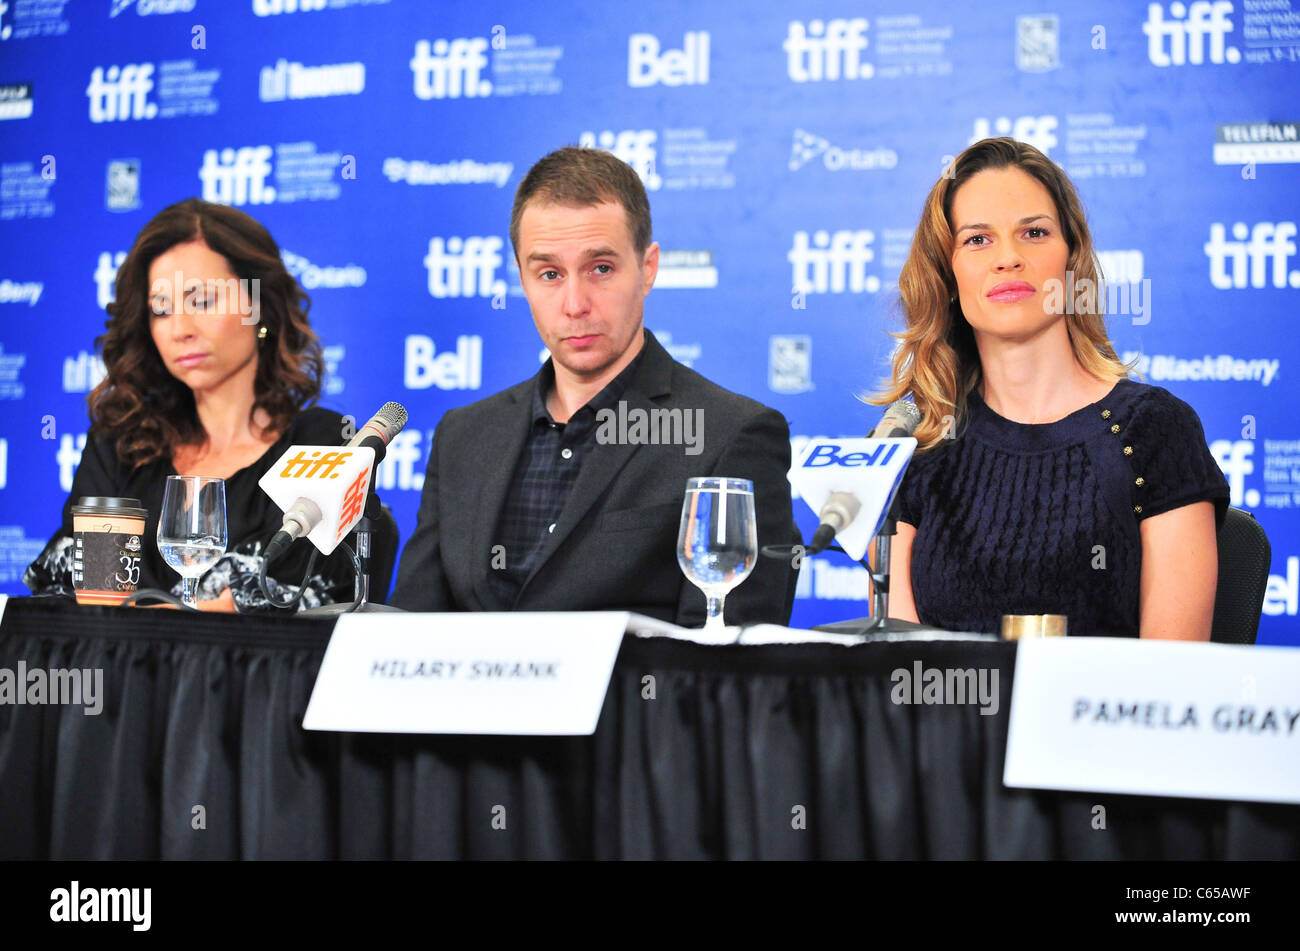 (L-R) Minnie Driver, Sam Rockwell, Hilary Swank at the press conference for CONVICTION Press Conference at Toronto International Film Festival (TIFF), Hyatt Regency Hotel, Toronto, ON September 13, 2010. Photo By: Gregorio T. Binuya/Everett Collection Stock Photo